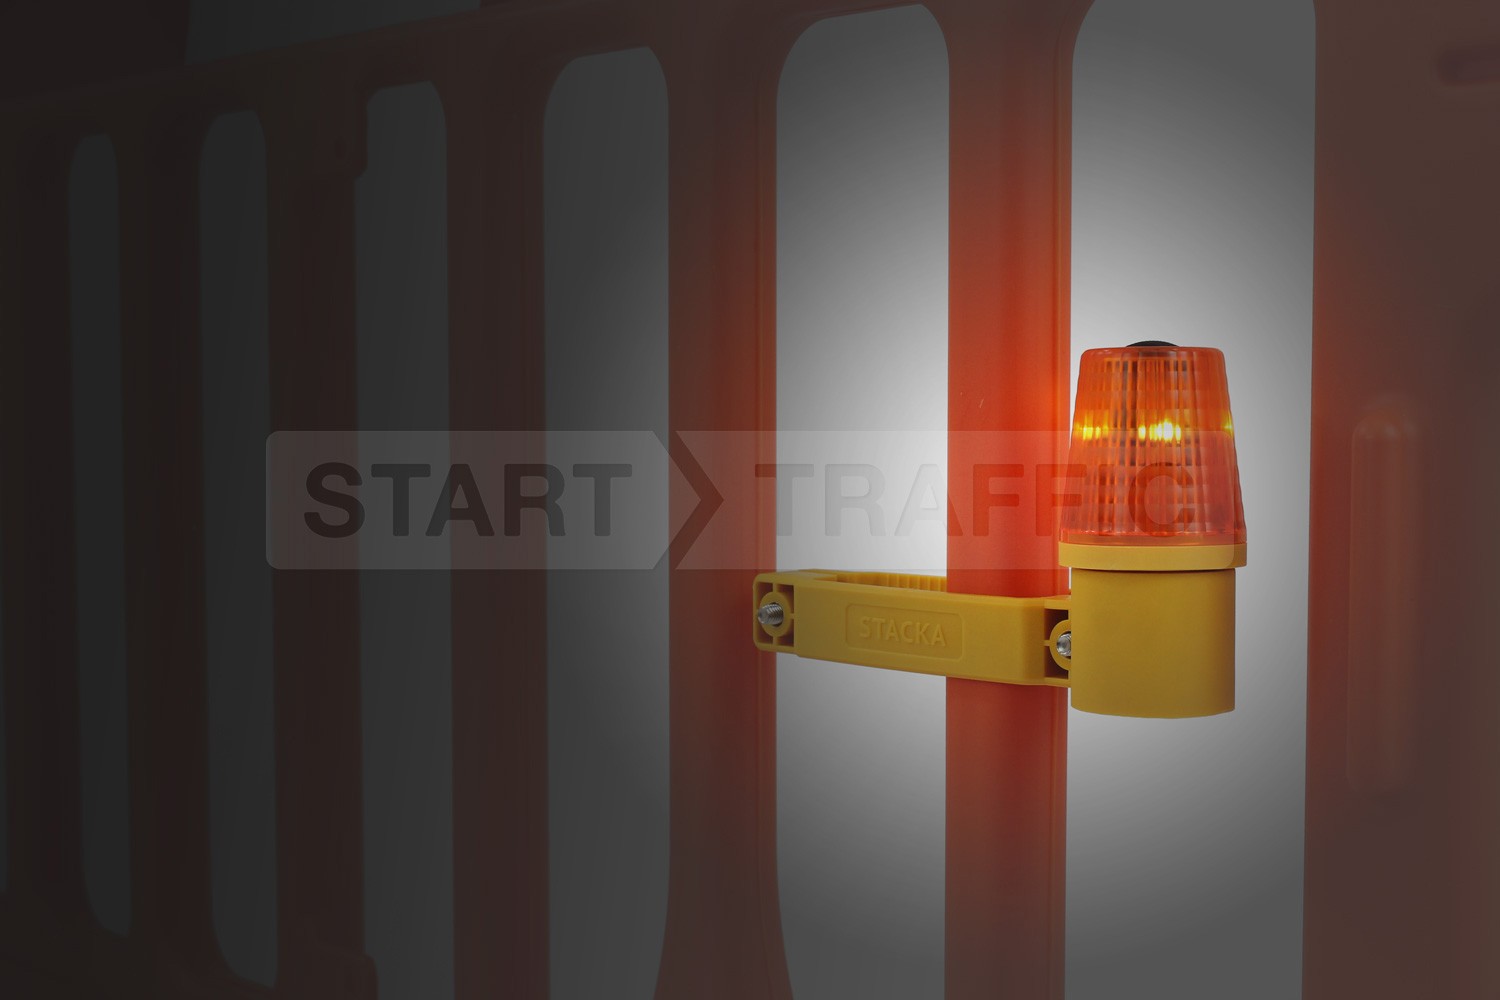 The New Stacka Barrier Lamp